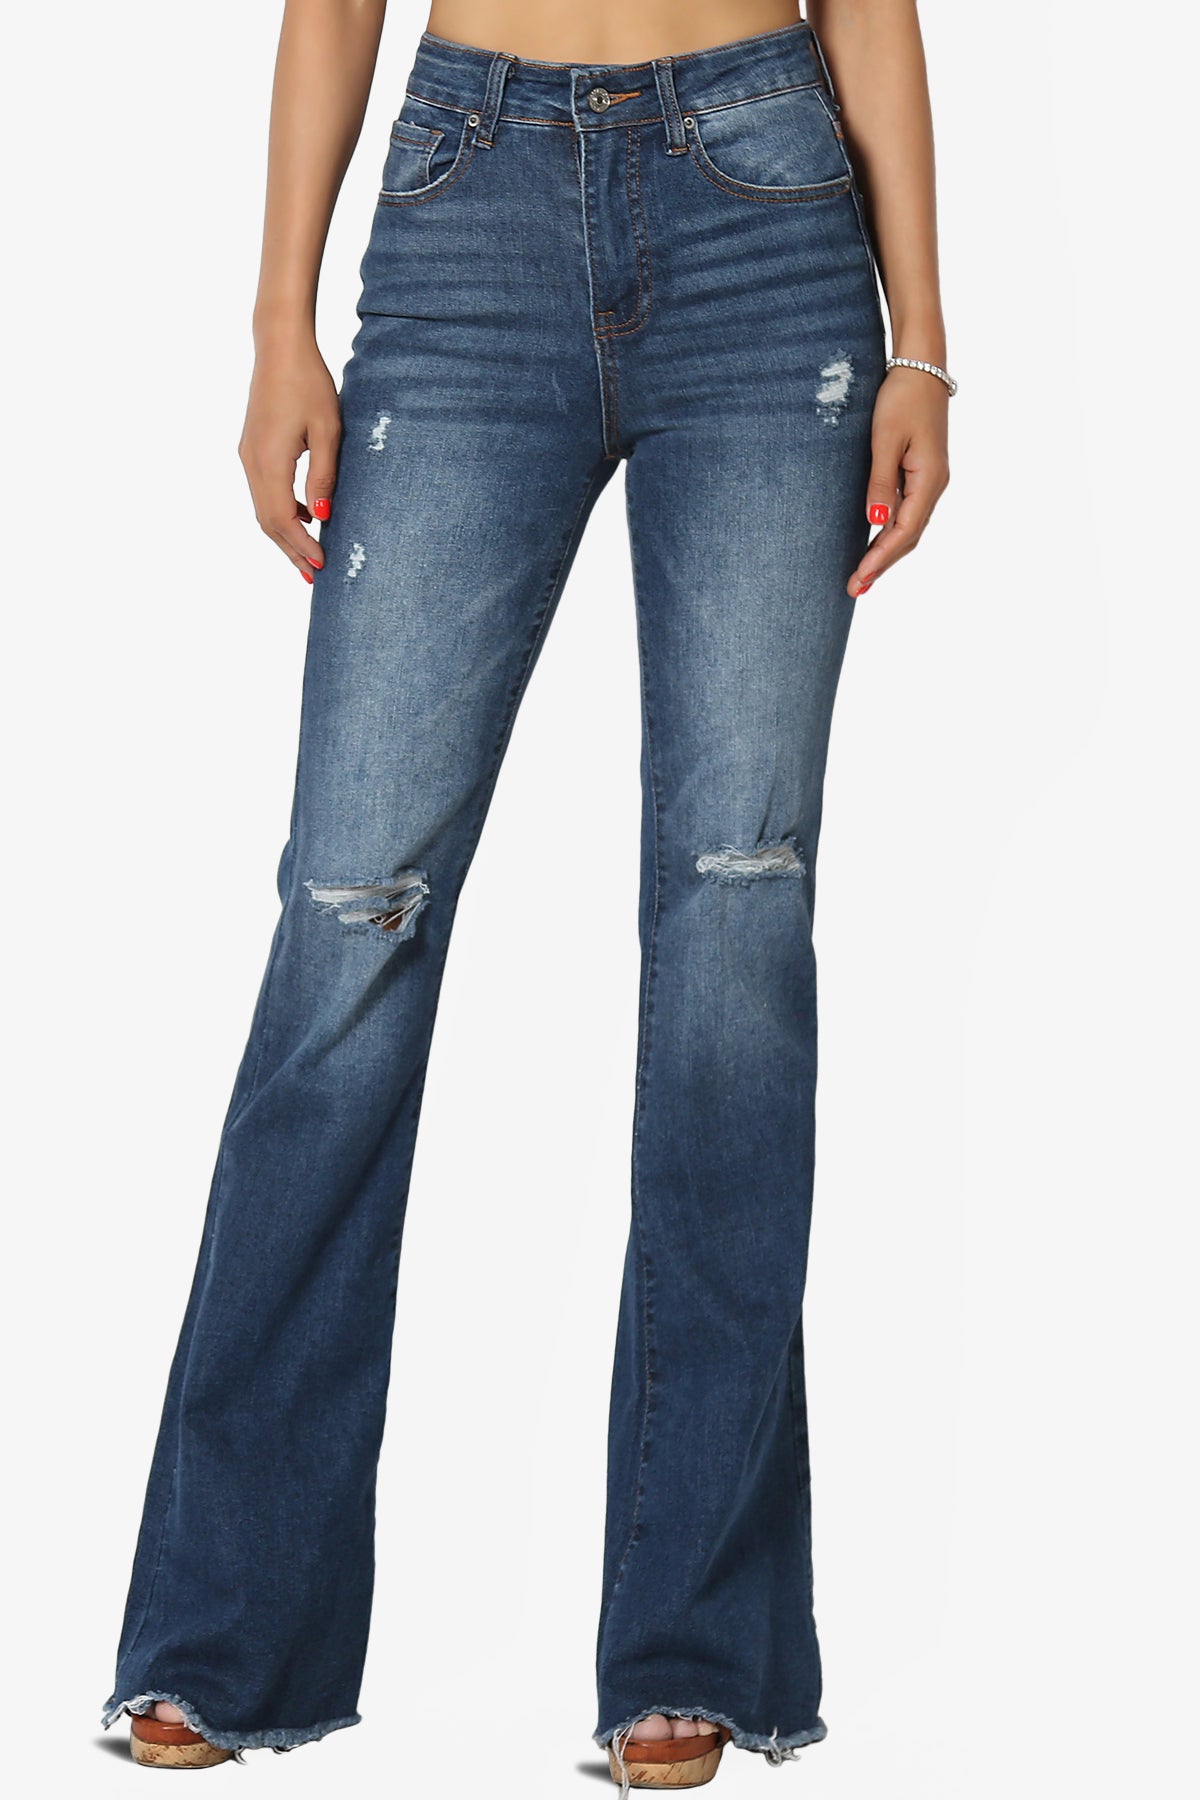 Load image into Gallery viewer, Snazzy High Rise Knee Destroy Flare Jeans DARK
